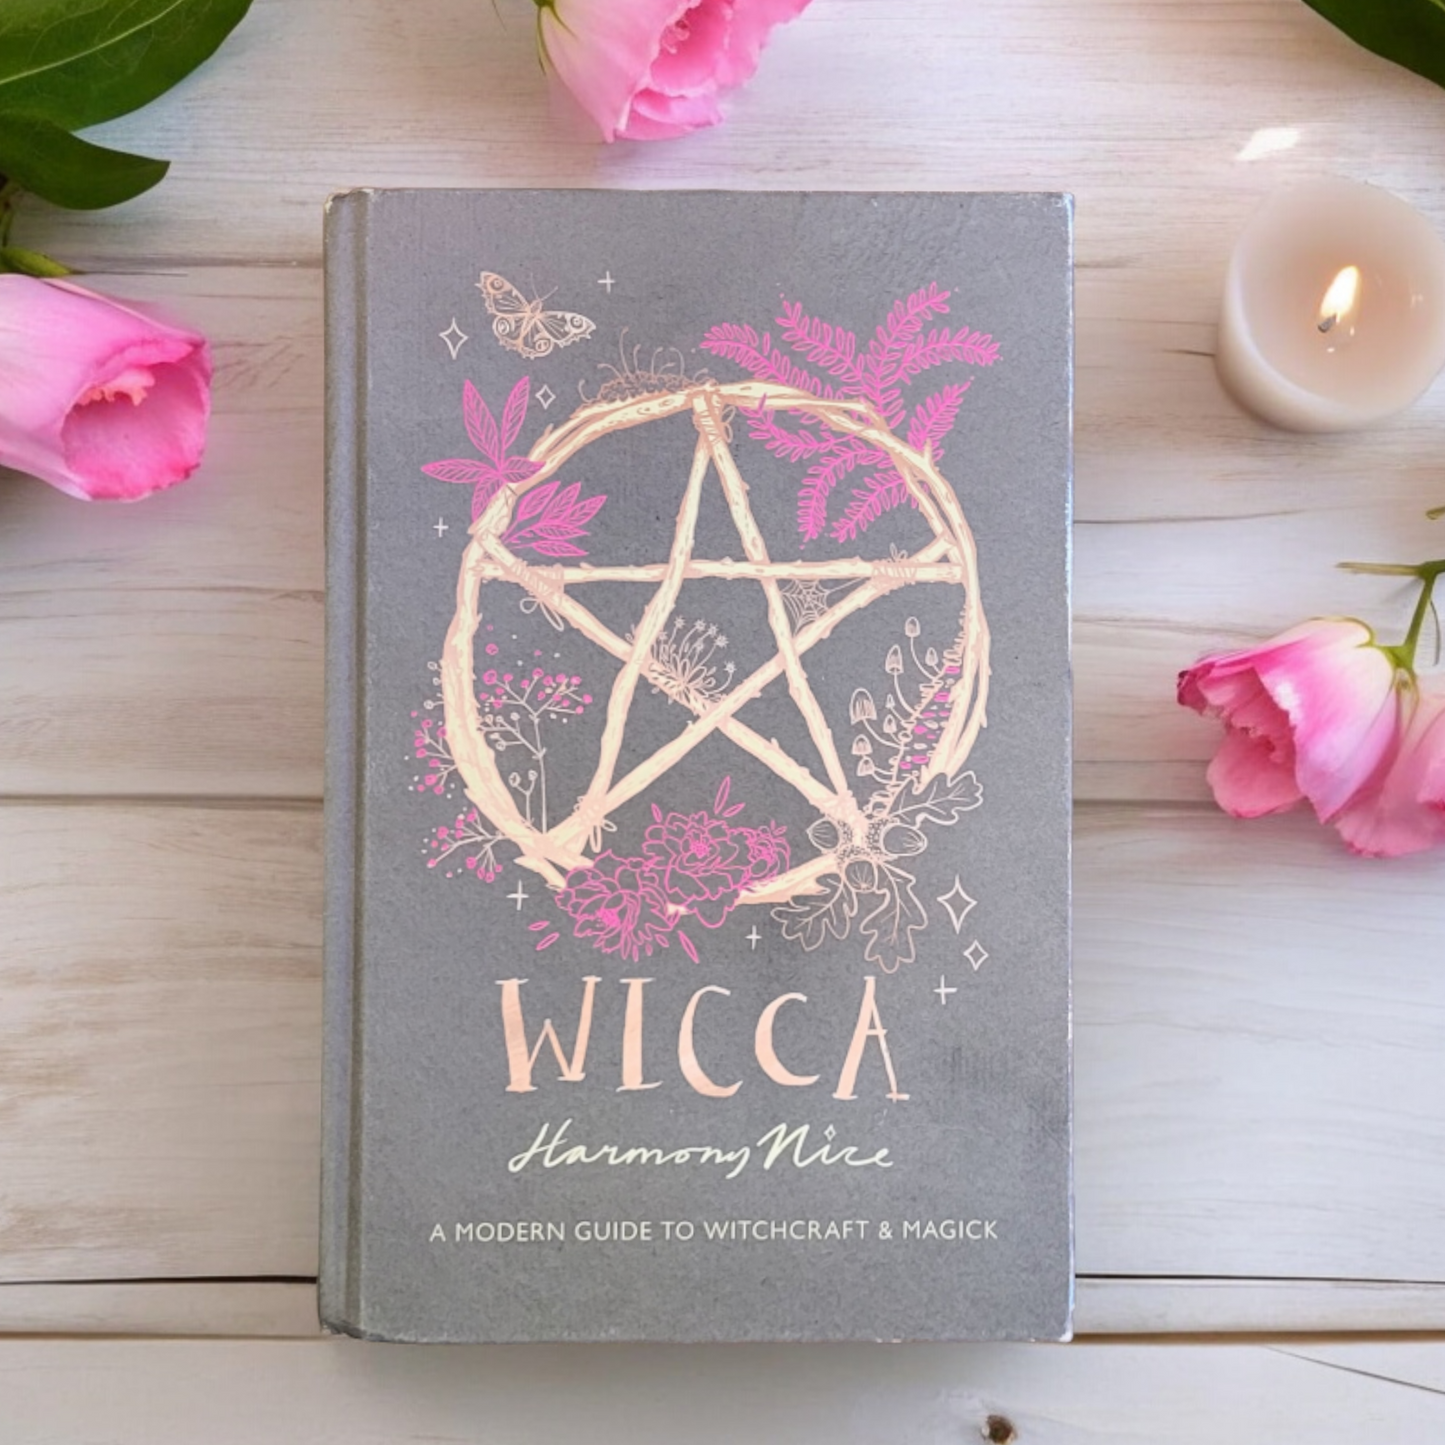 (Pre-Loved) Wicca: A Modern Guide To Witchcraft & Magick by Harmony Nice